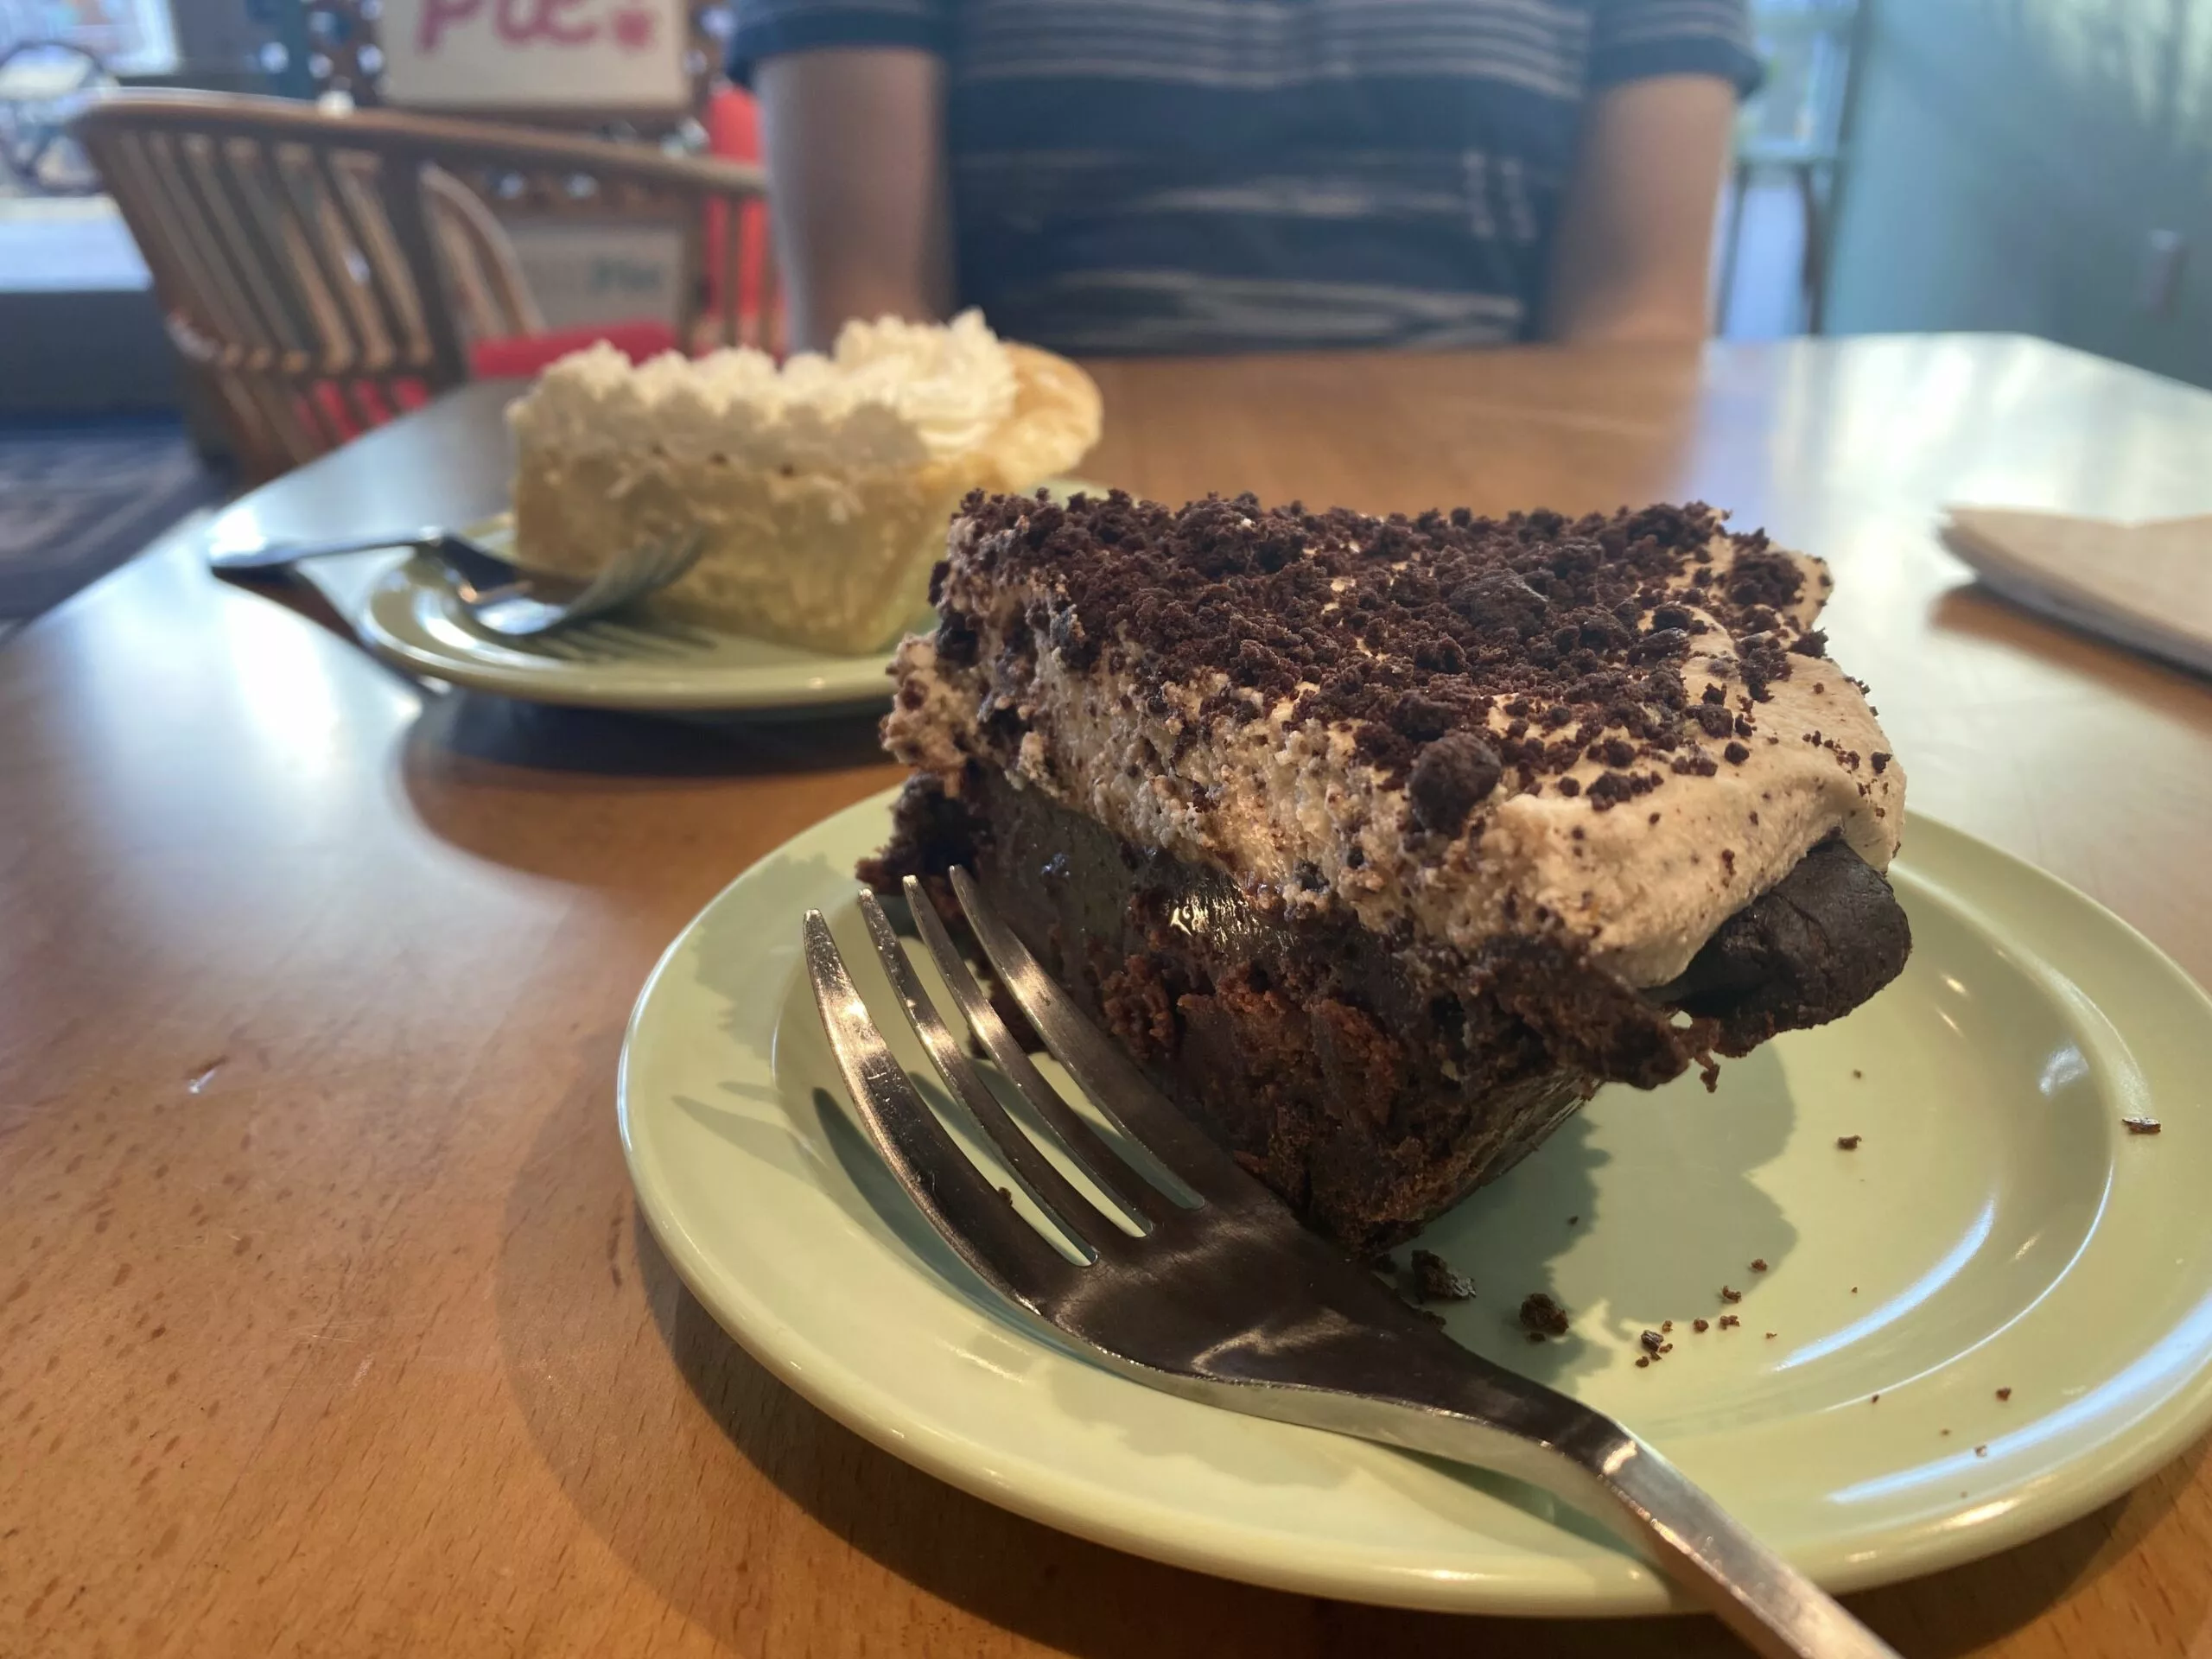 Two slices of pie at Peace, Love & Pie in Wichita, Kansas